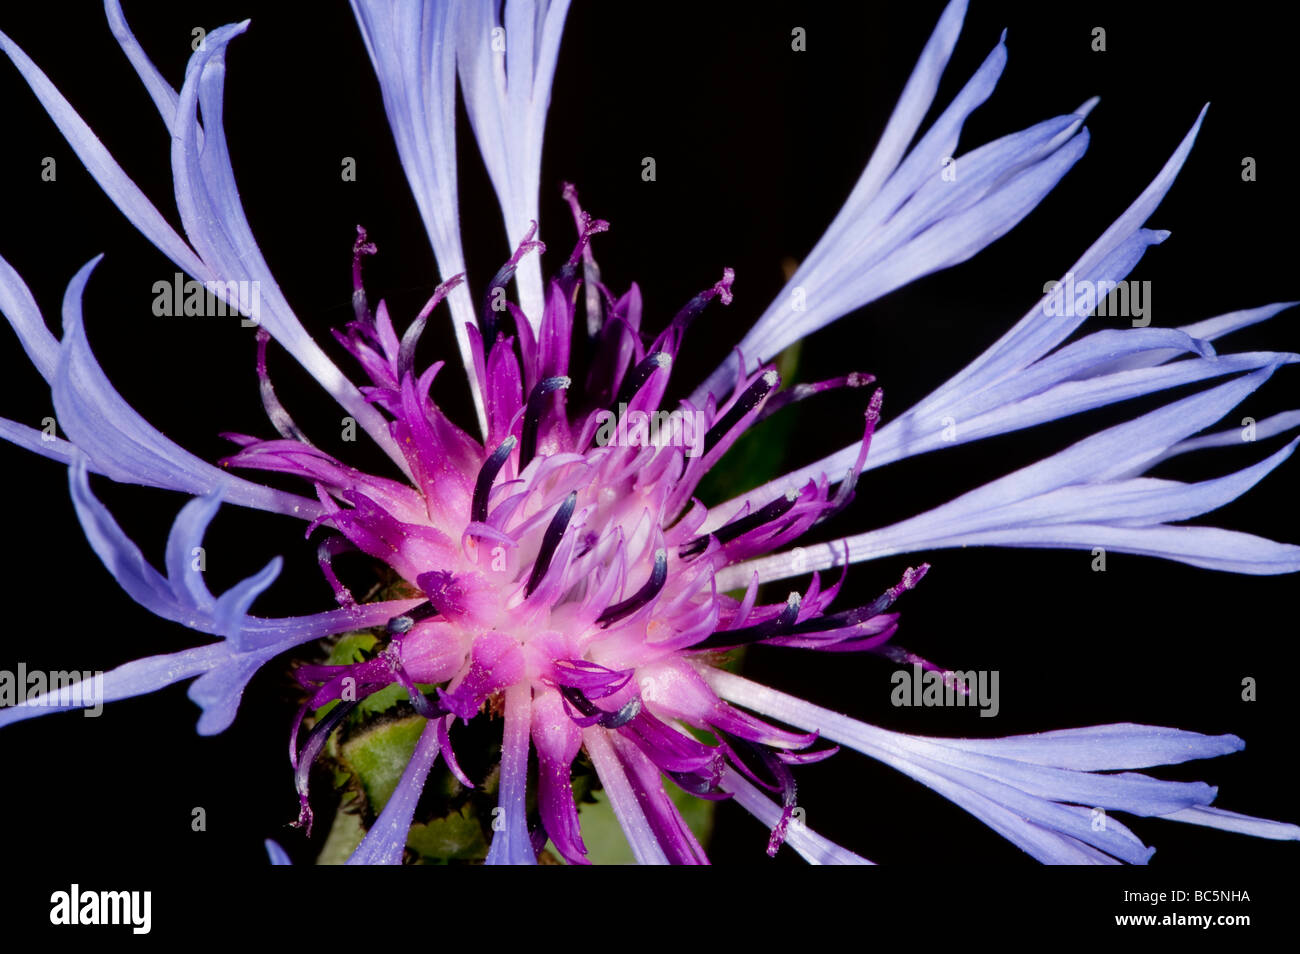 Close up of Perrenial cornflower showing the pollen grains being deposited by the anthers Stock Photo